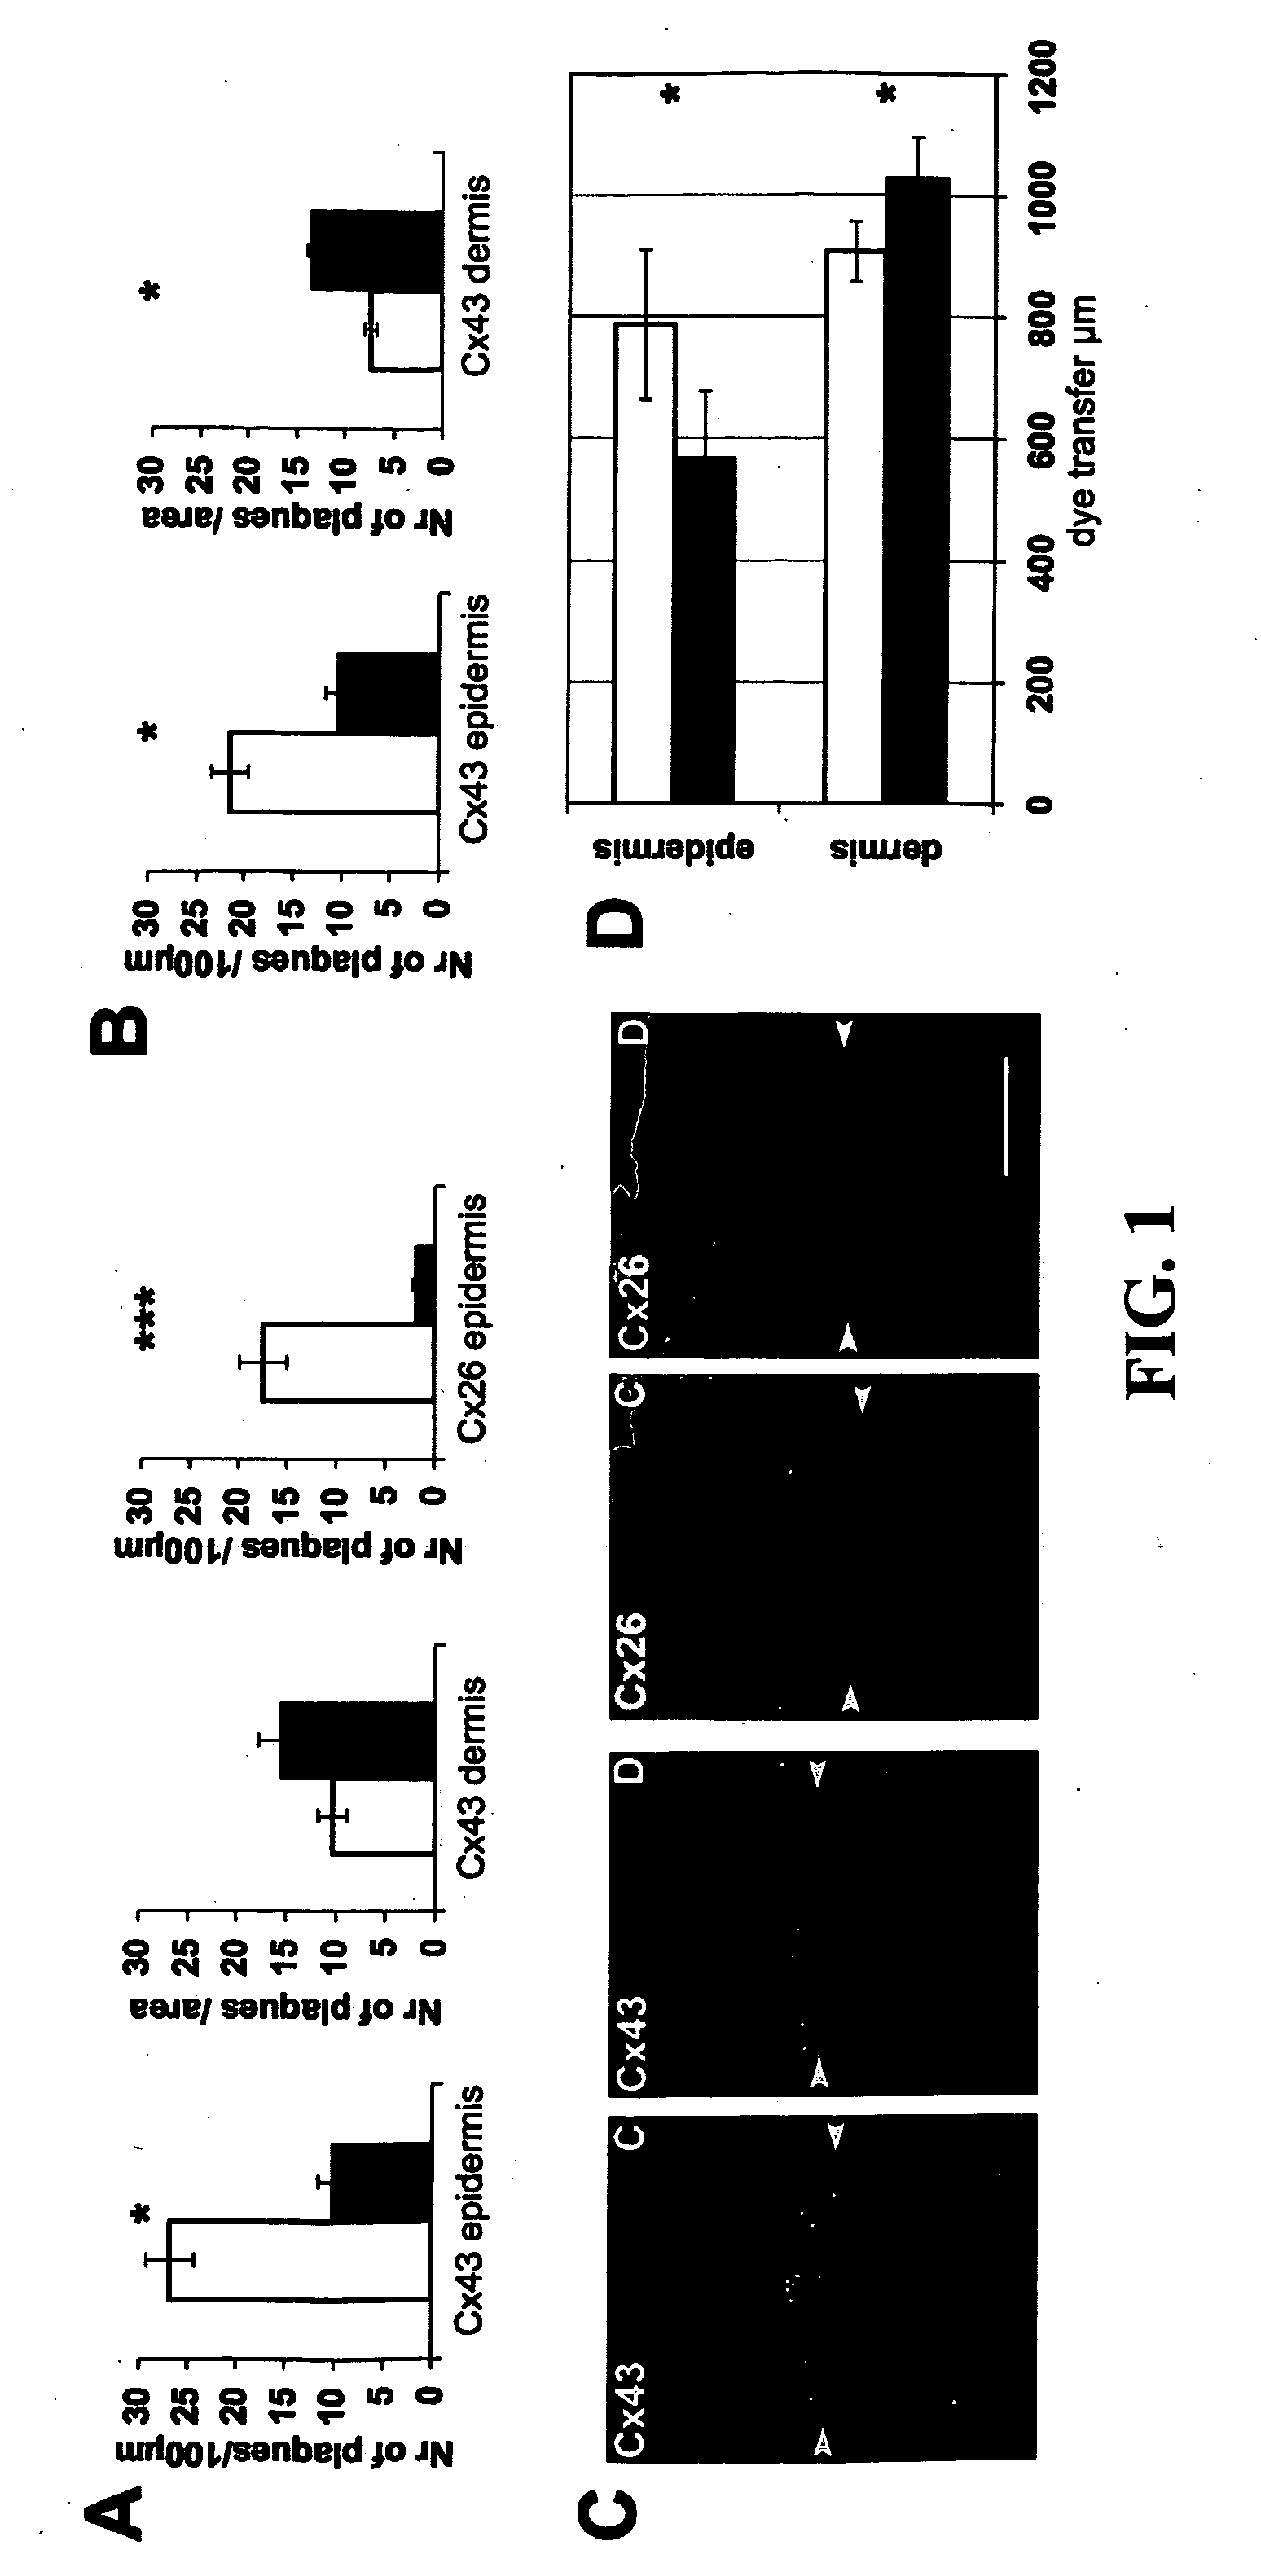 Impaired wound healing compositions and treatments